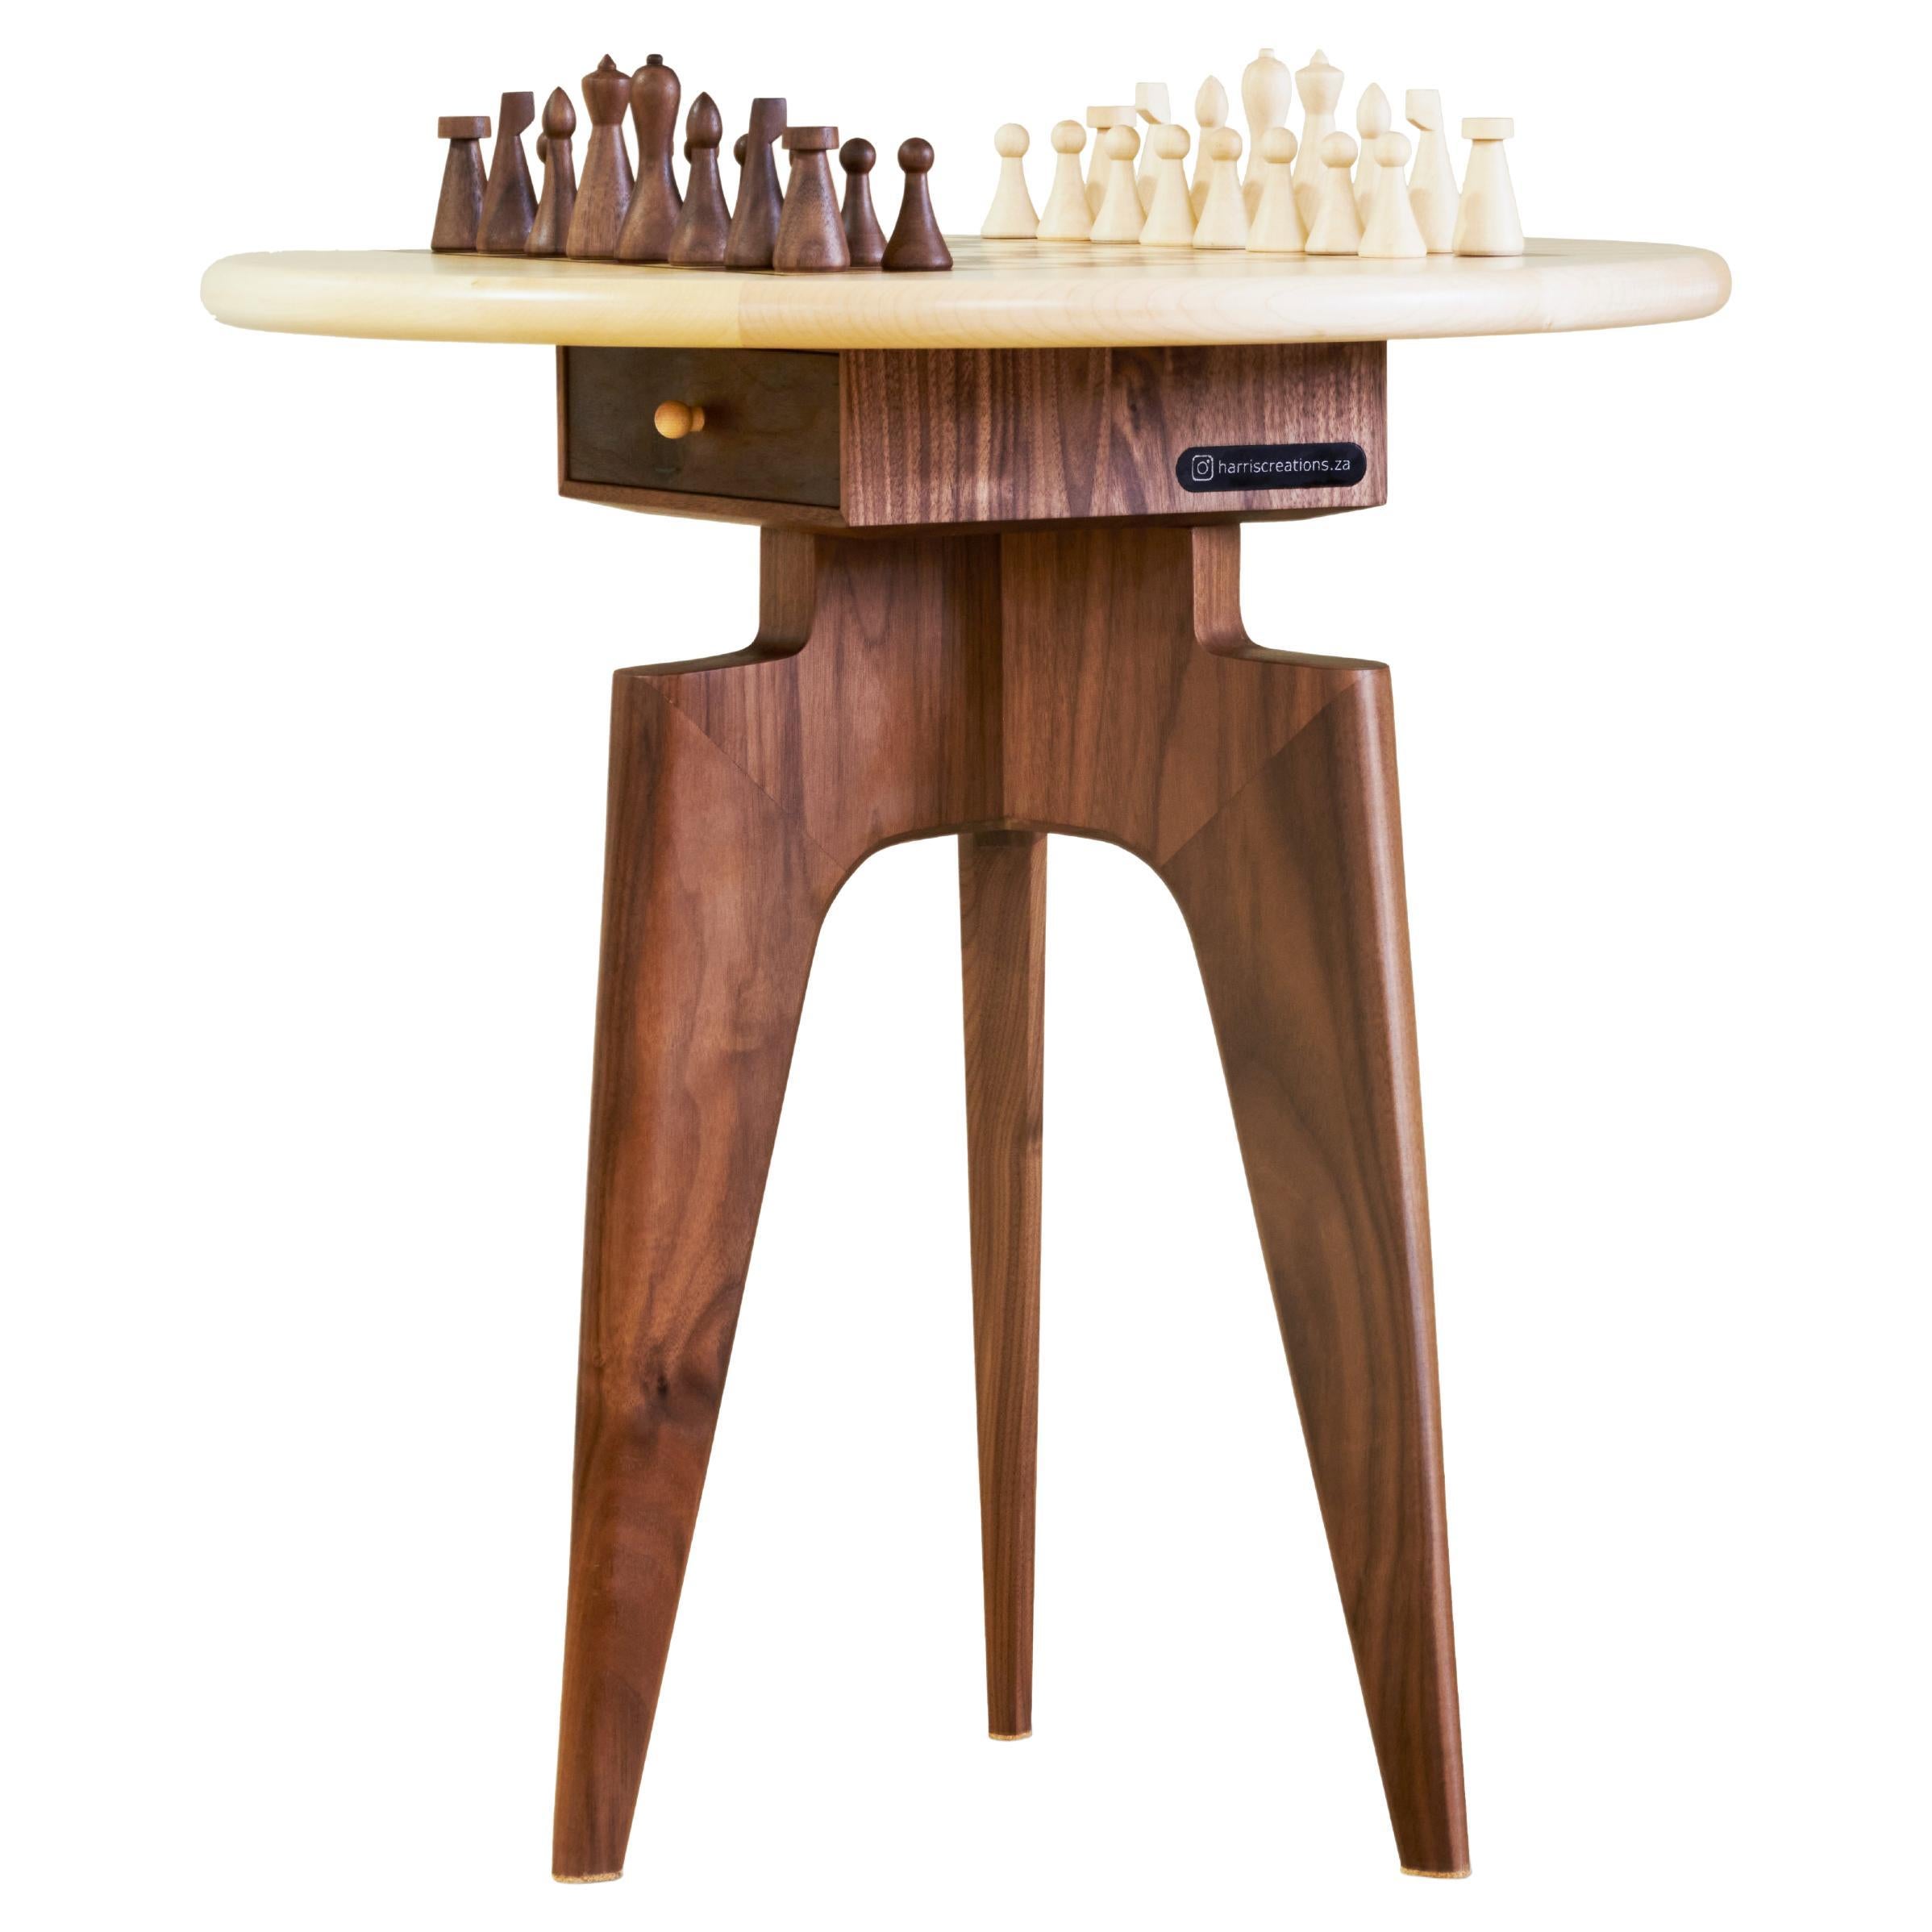 Wood Porn - A Wildly Classy Chess Set (Walnut and Sycamore)